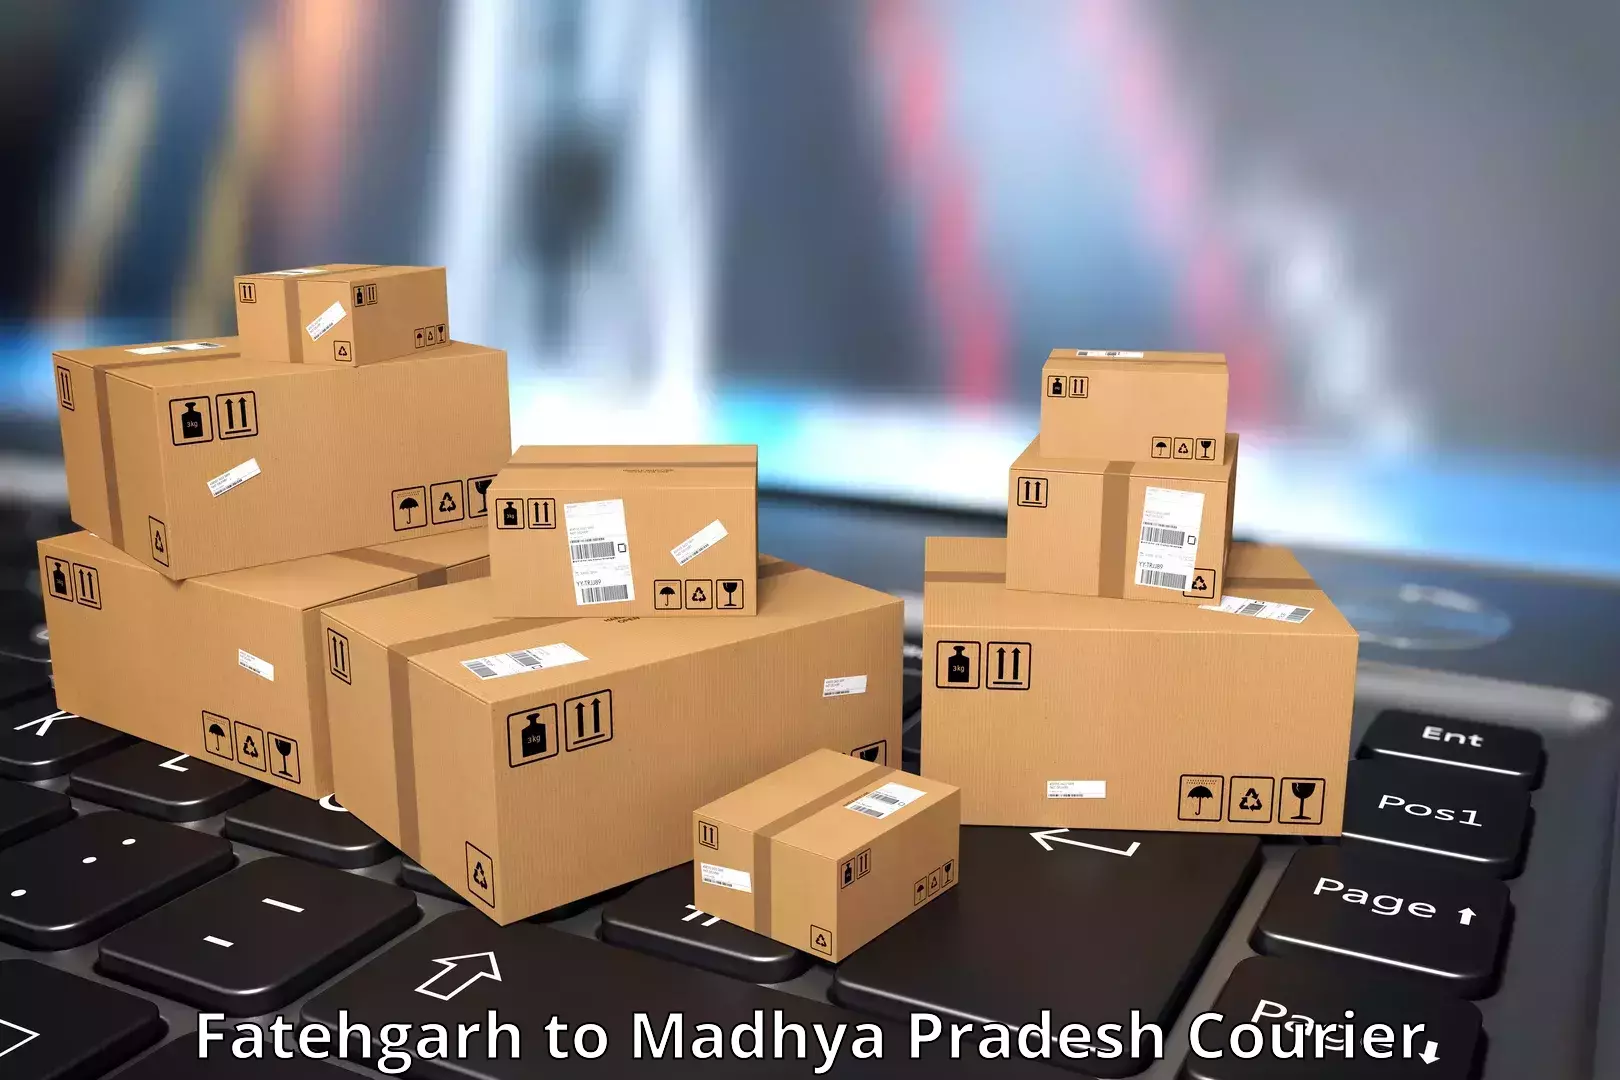 Advanced package delivery Fatehgarh to IIIT Bhopal